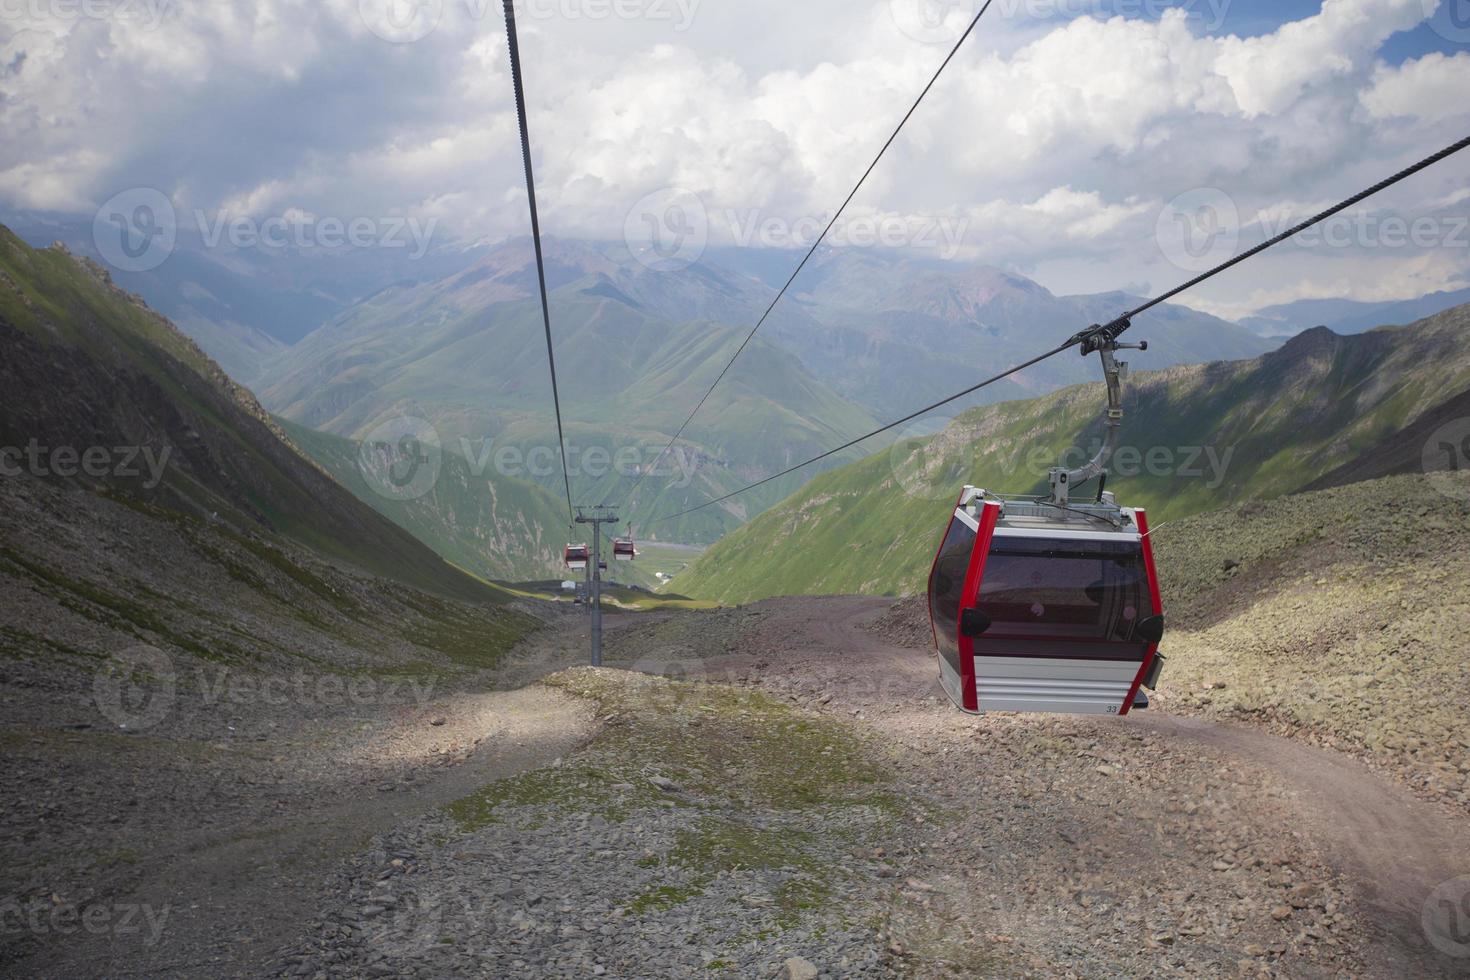 Cableway in the mountains. The landscape of the cable car of the mountains of Georgia. photo